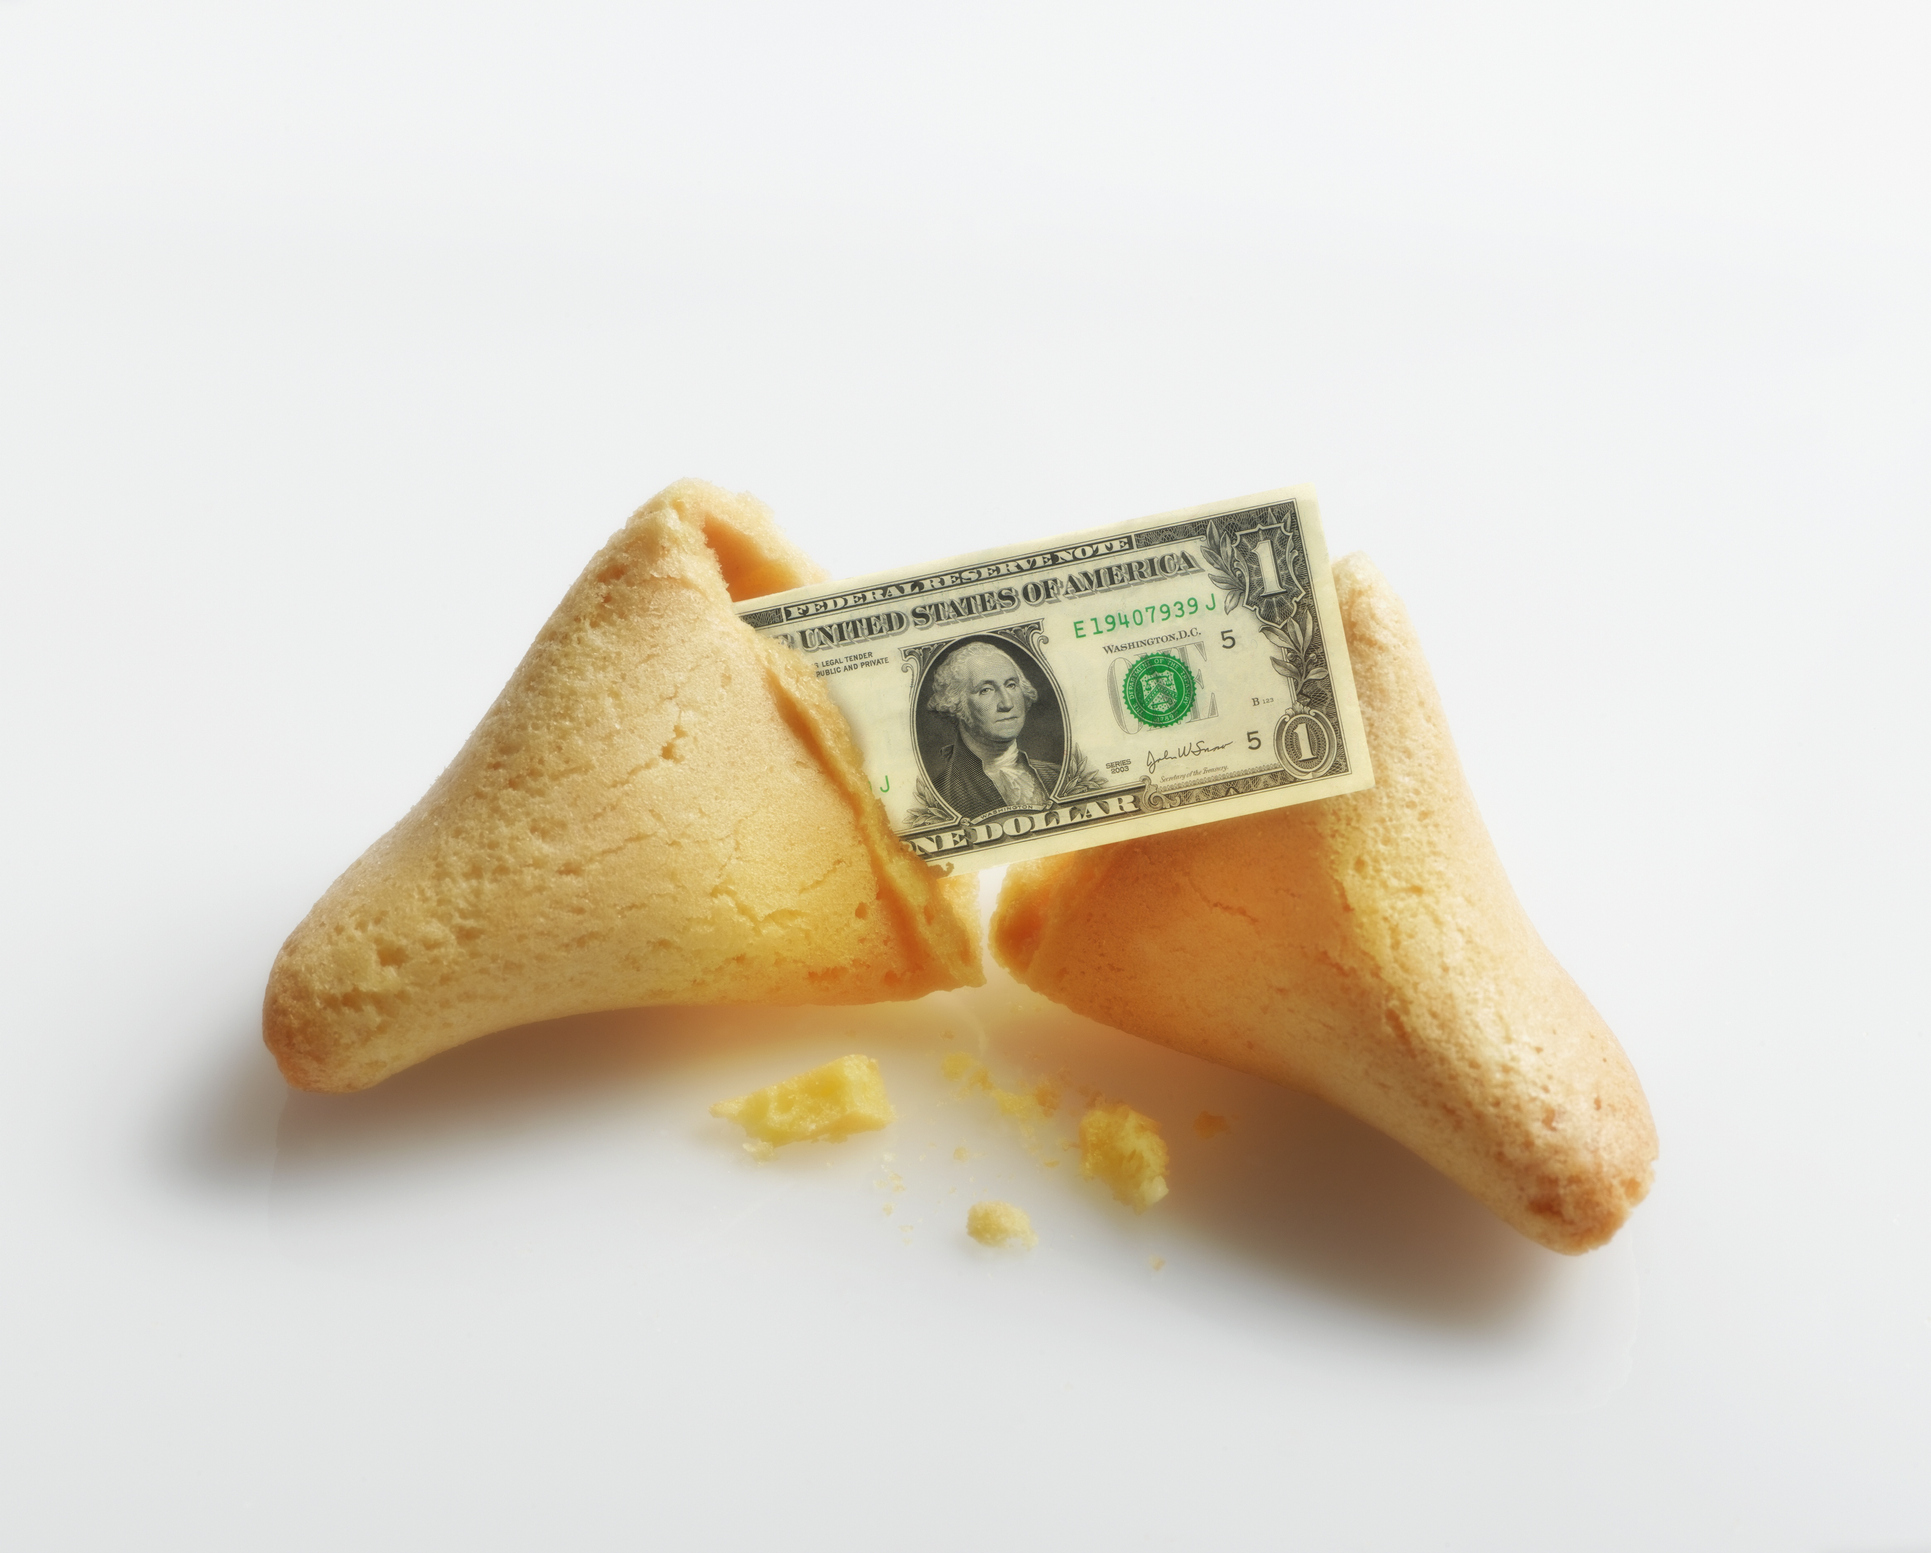 A broken fortune cookie with a US dollar inside